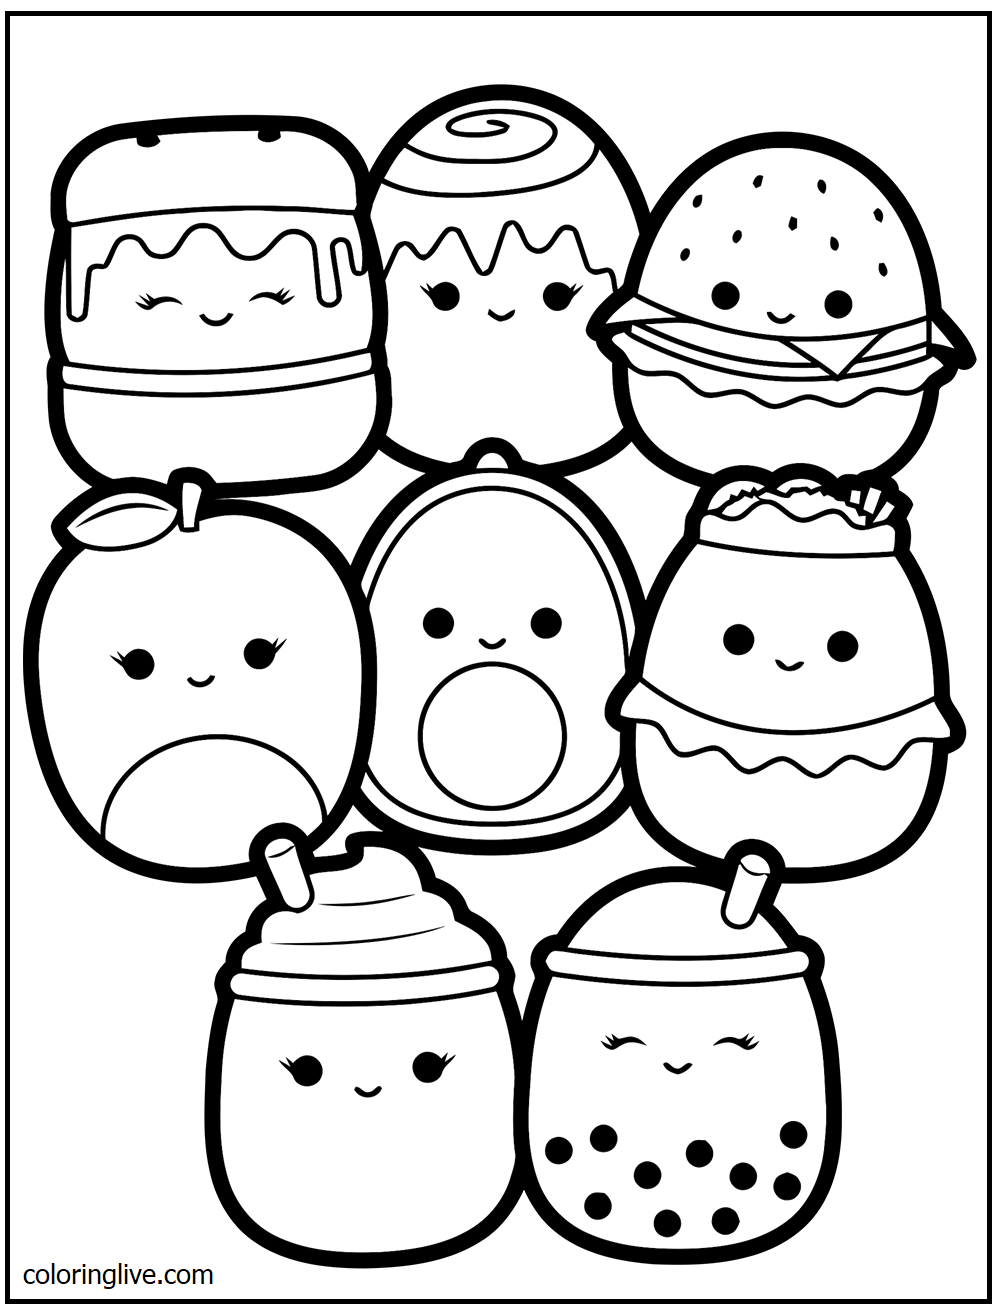 Printable Squishmallow   11 Coloring Page for kids.